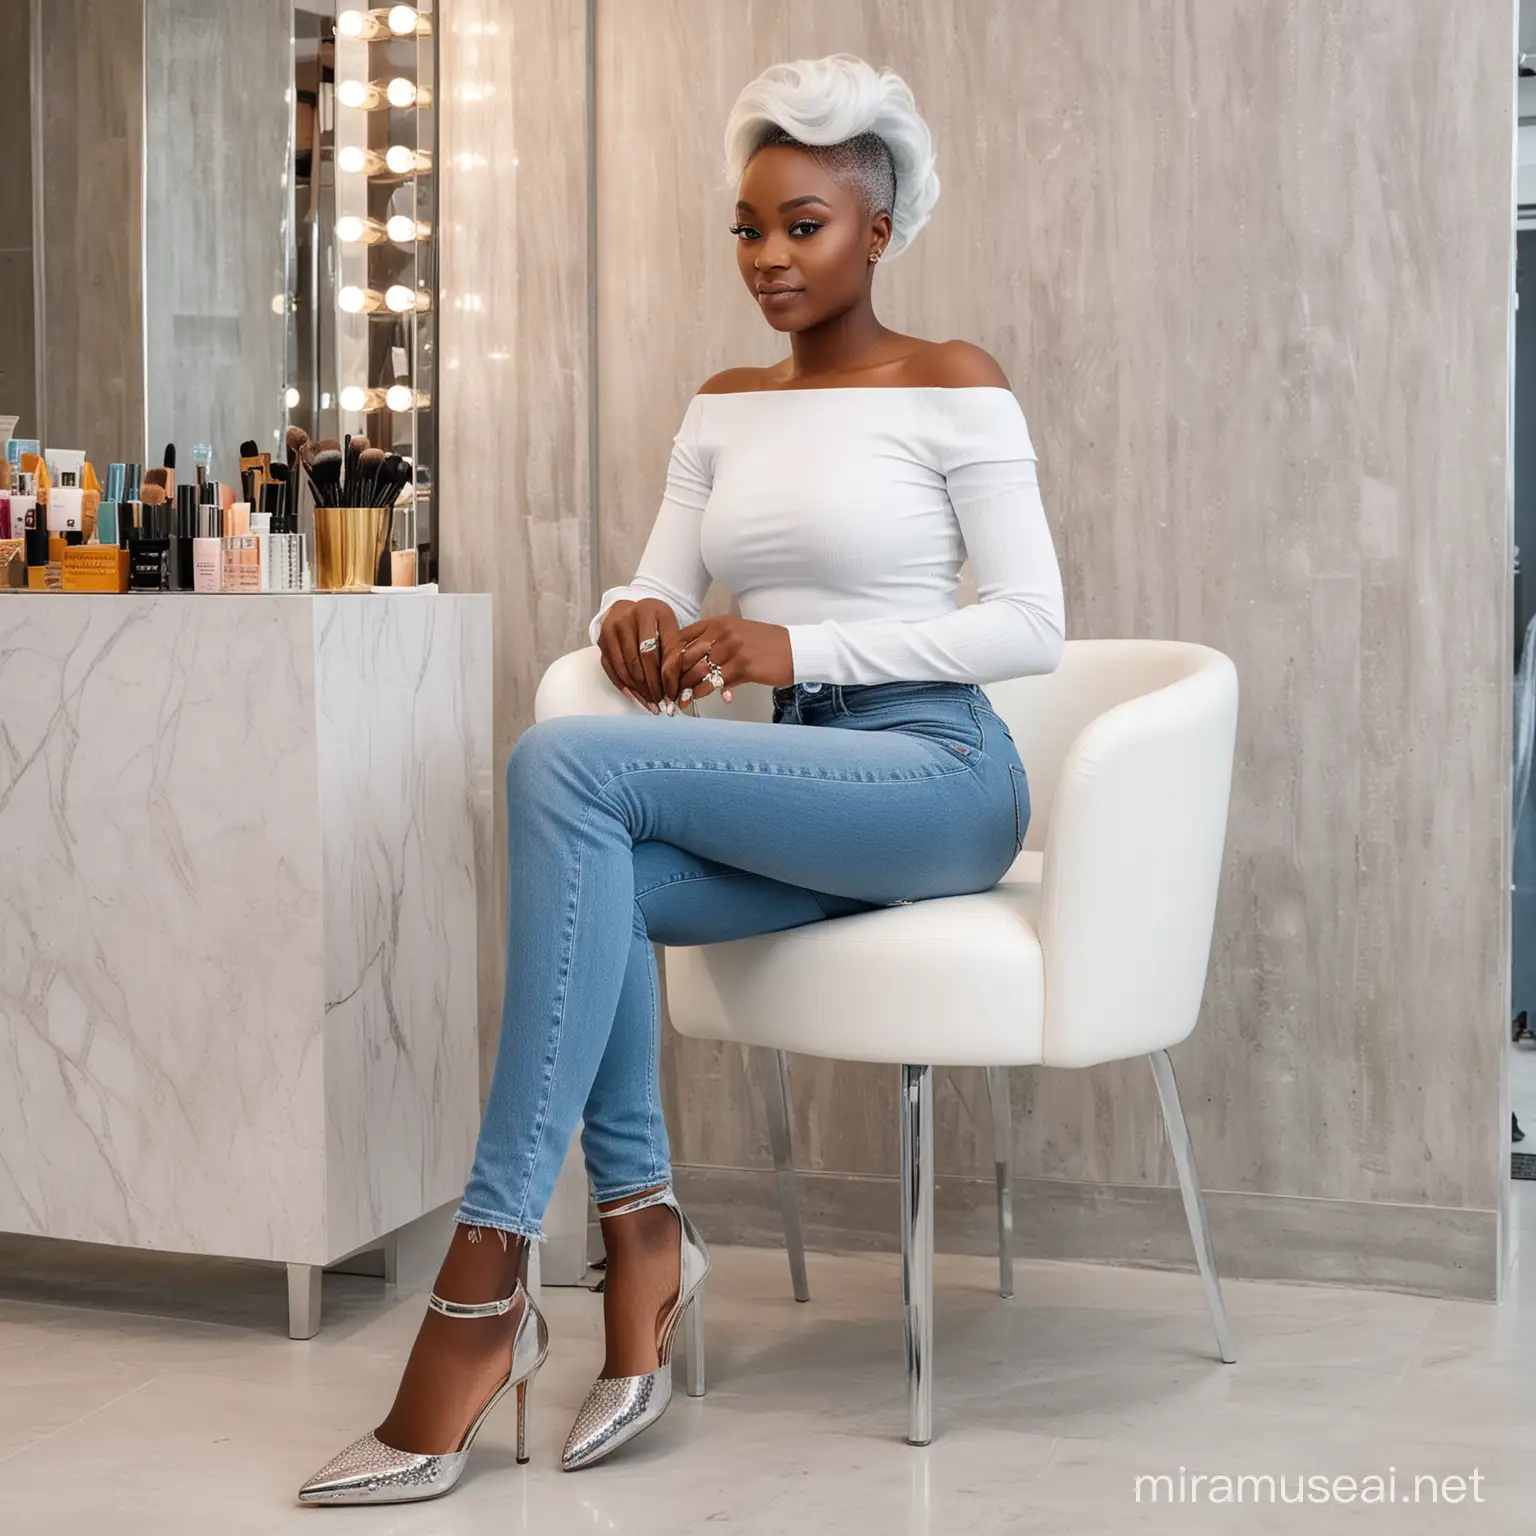 In a large, chic and colorful beauty salon, show a captivating image of a Nigerian woman wearing a white top over jeans. She wears icy silver hair and is seated very close to the entrance on a chair, where she can be seen doing her nails.